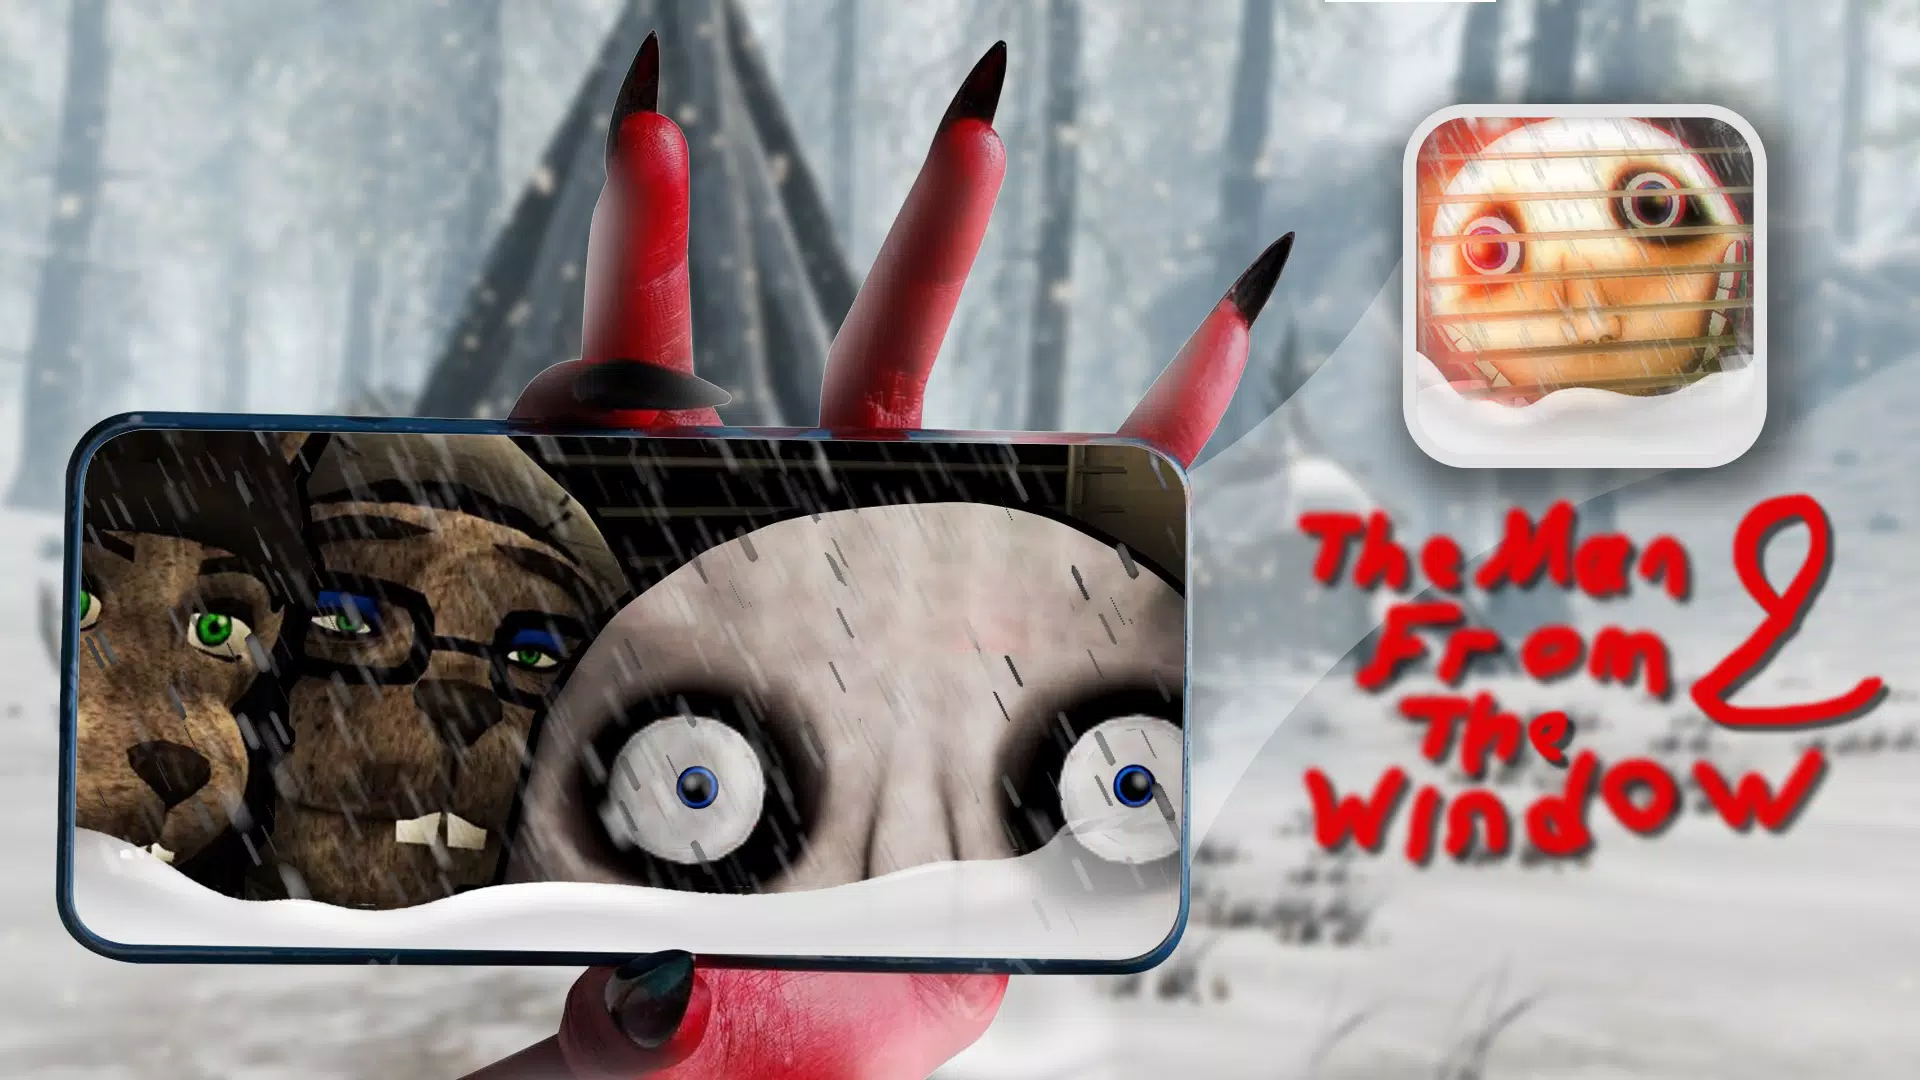 The Snow Man from the window 2 APK for Android Download